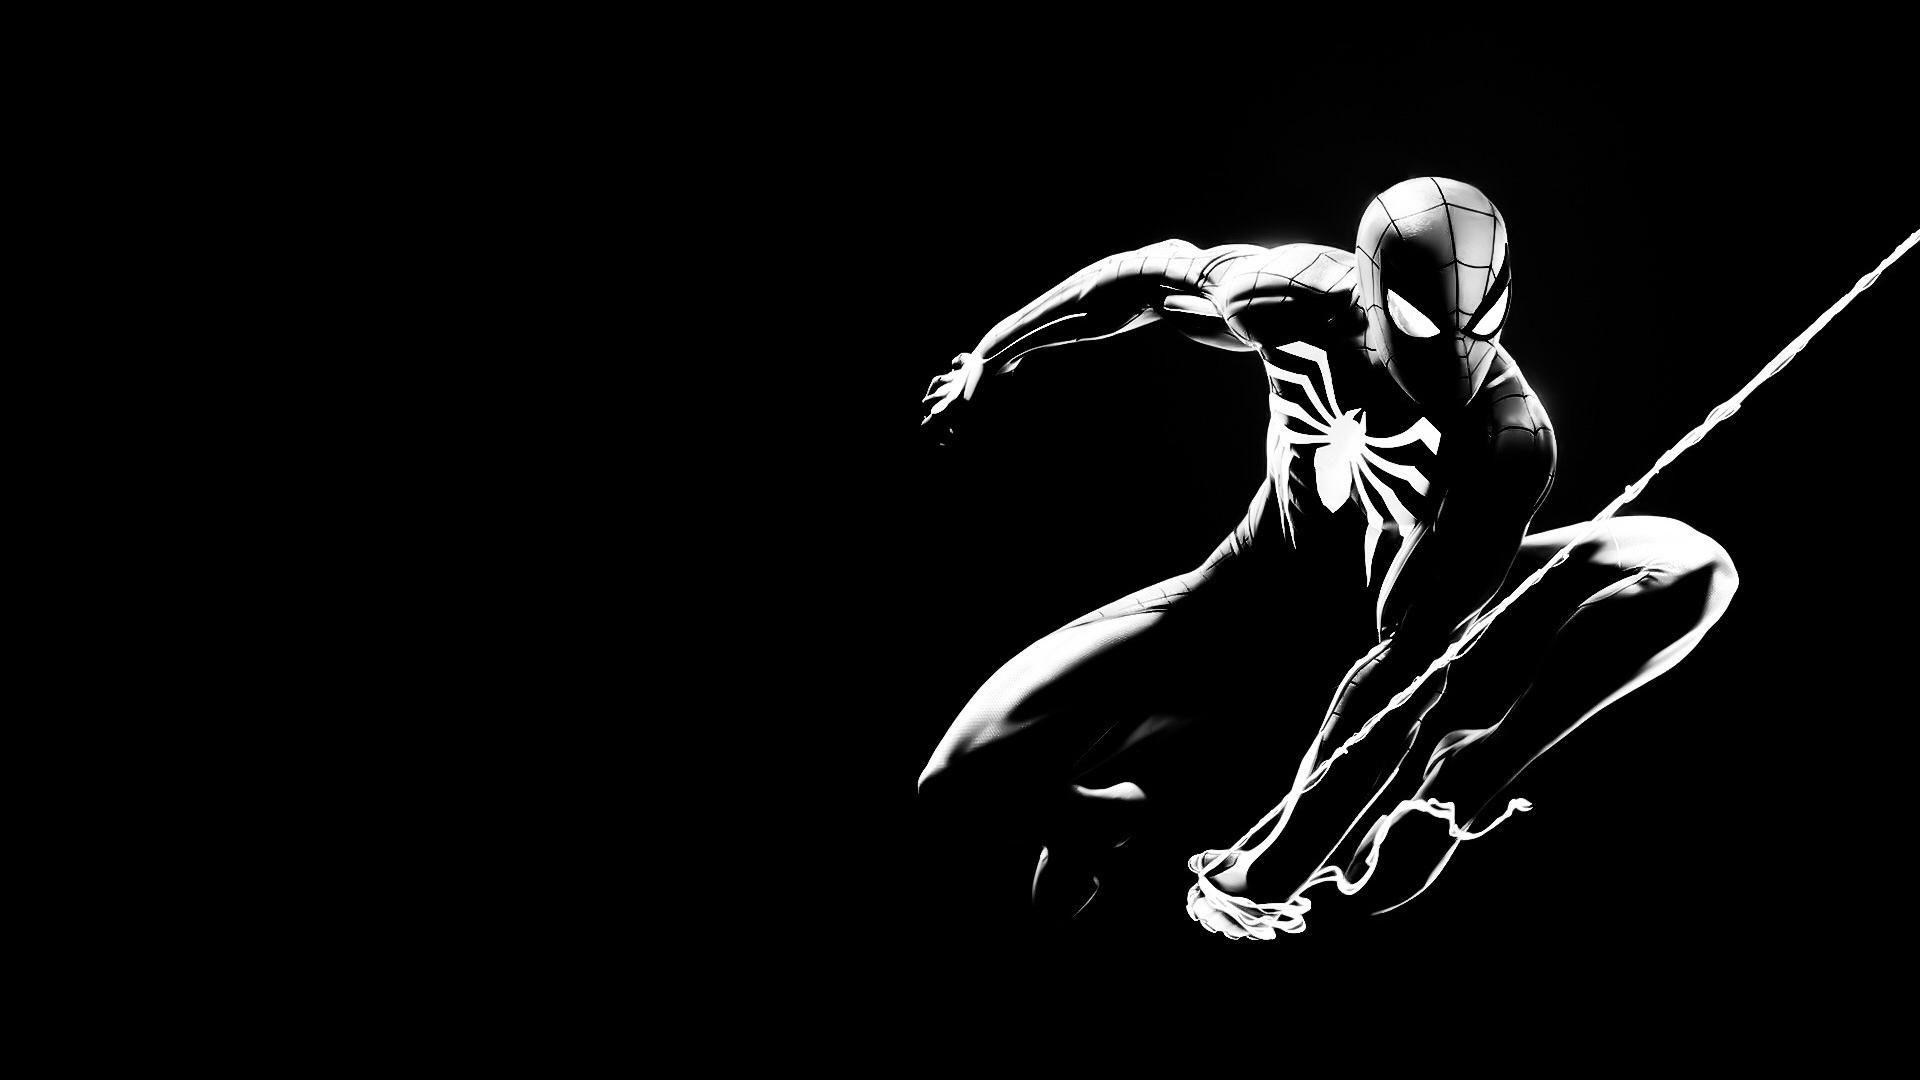 Black and White Spider-Man Wallpapers